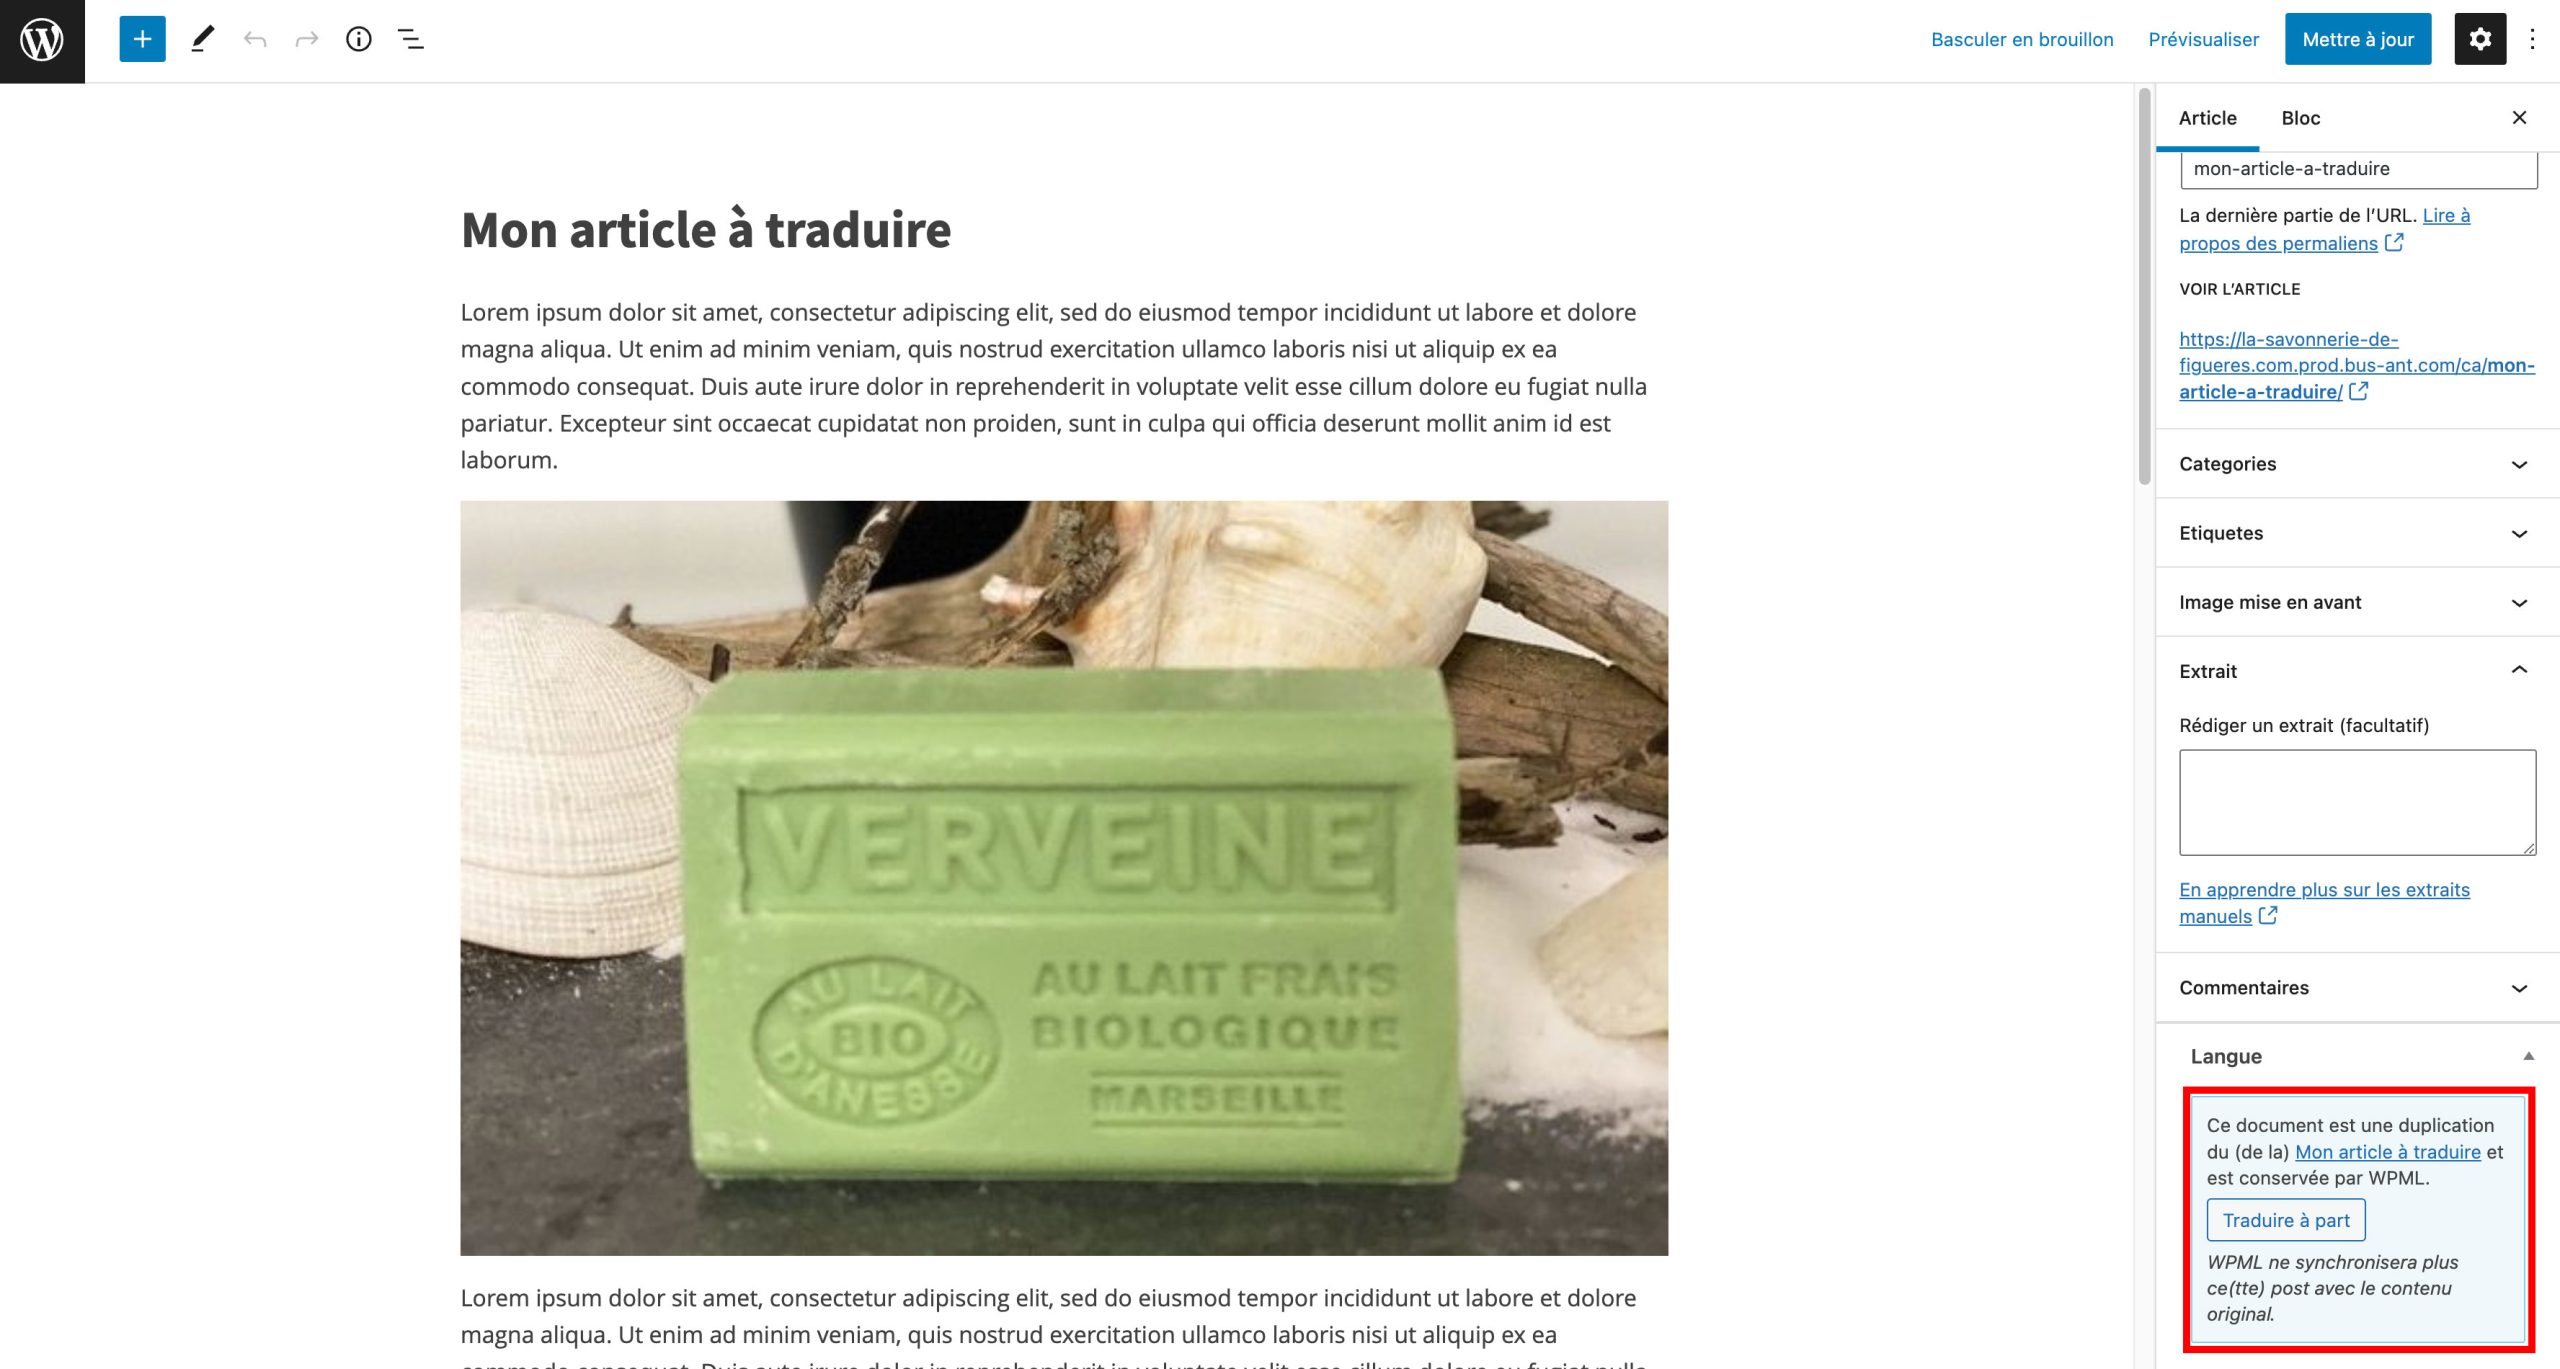 traduire a part article